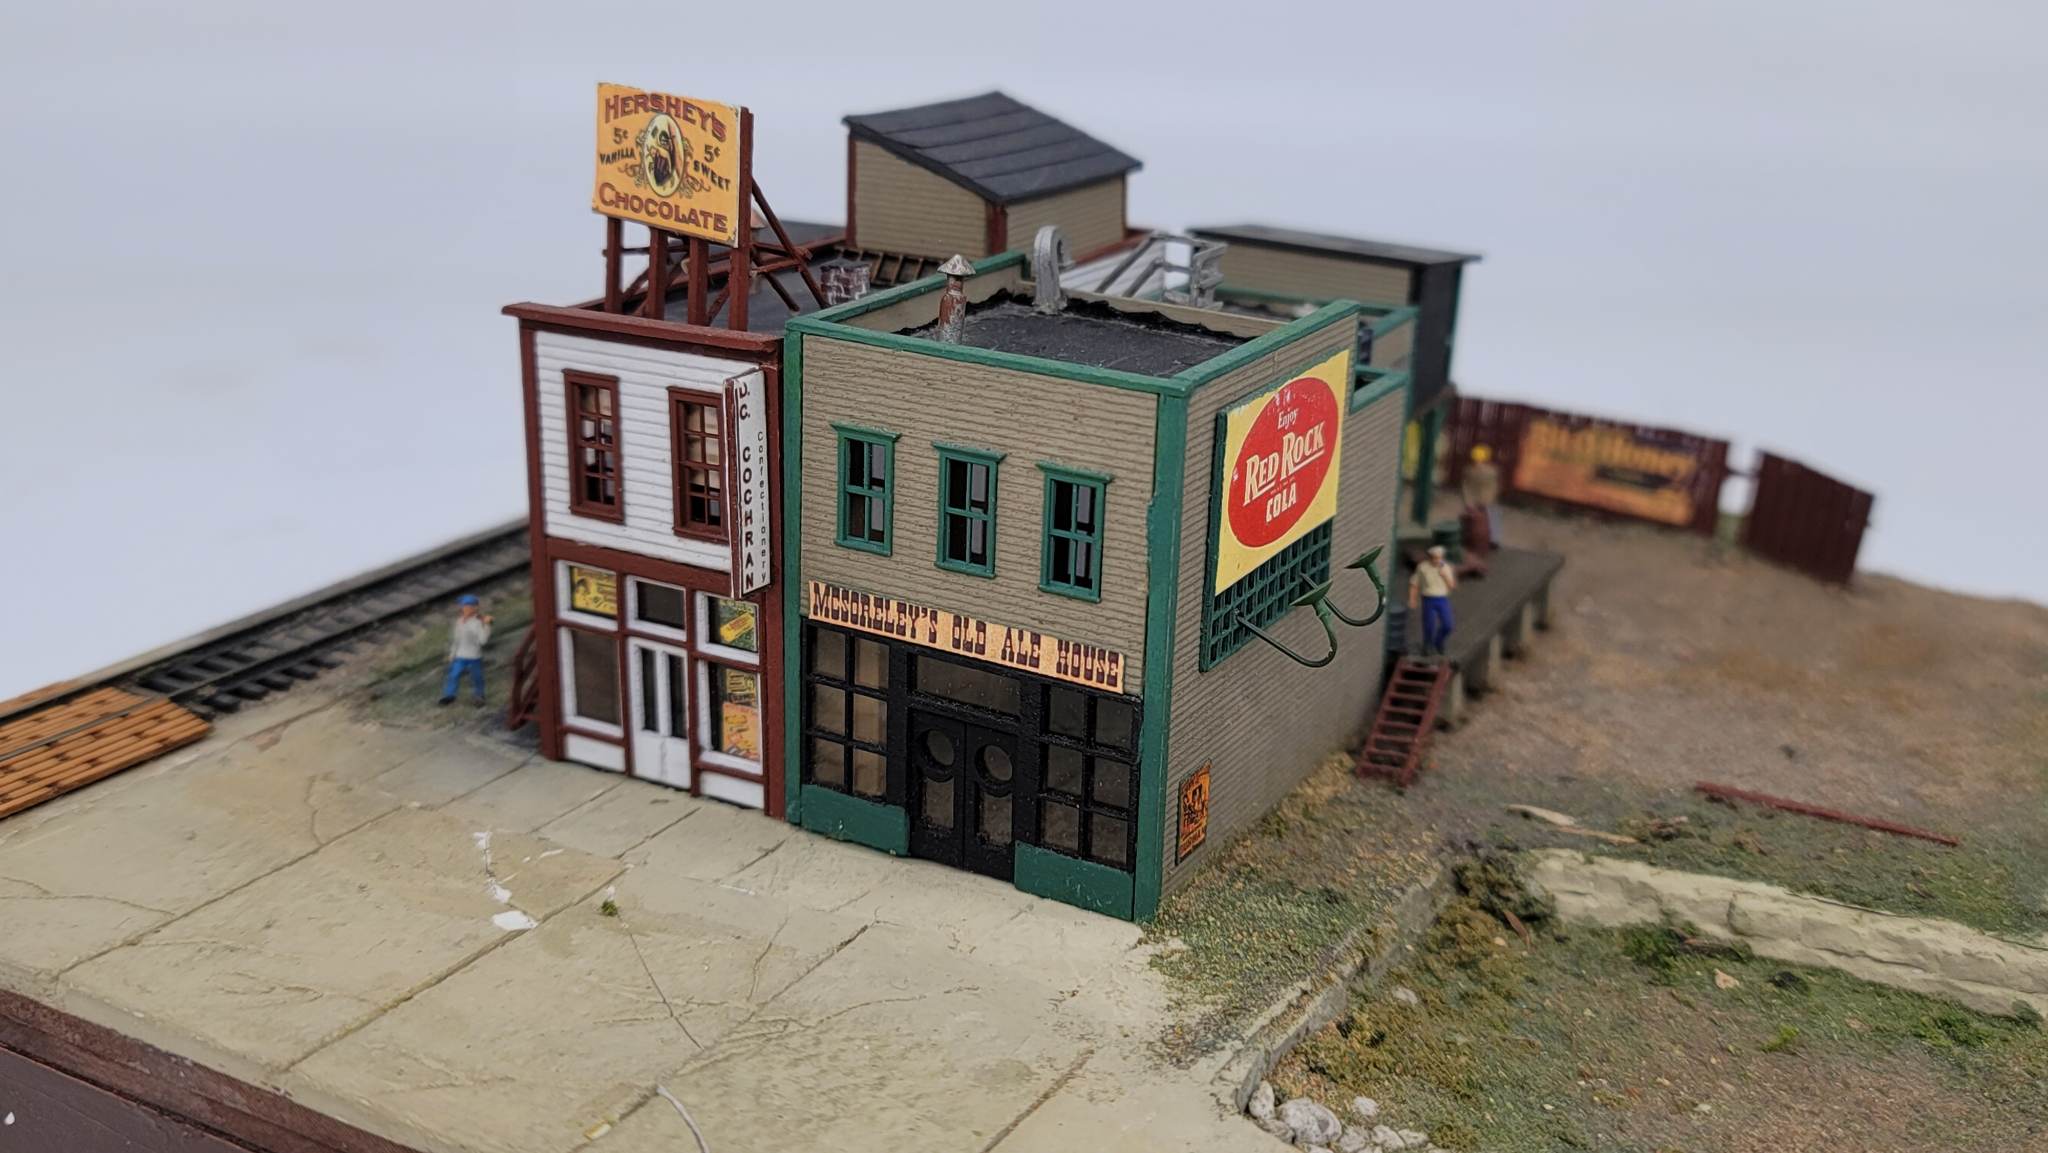 McSoreley's Old Ale House (N Scale)